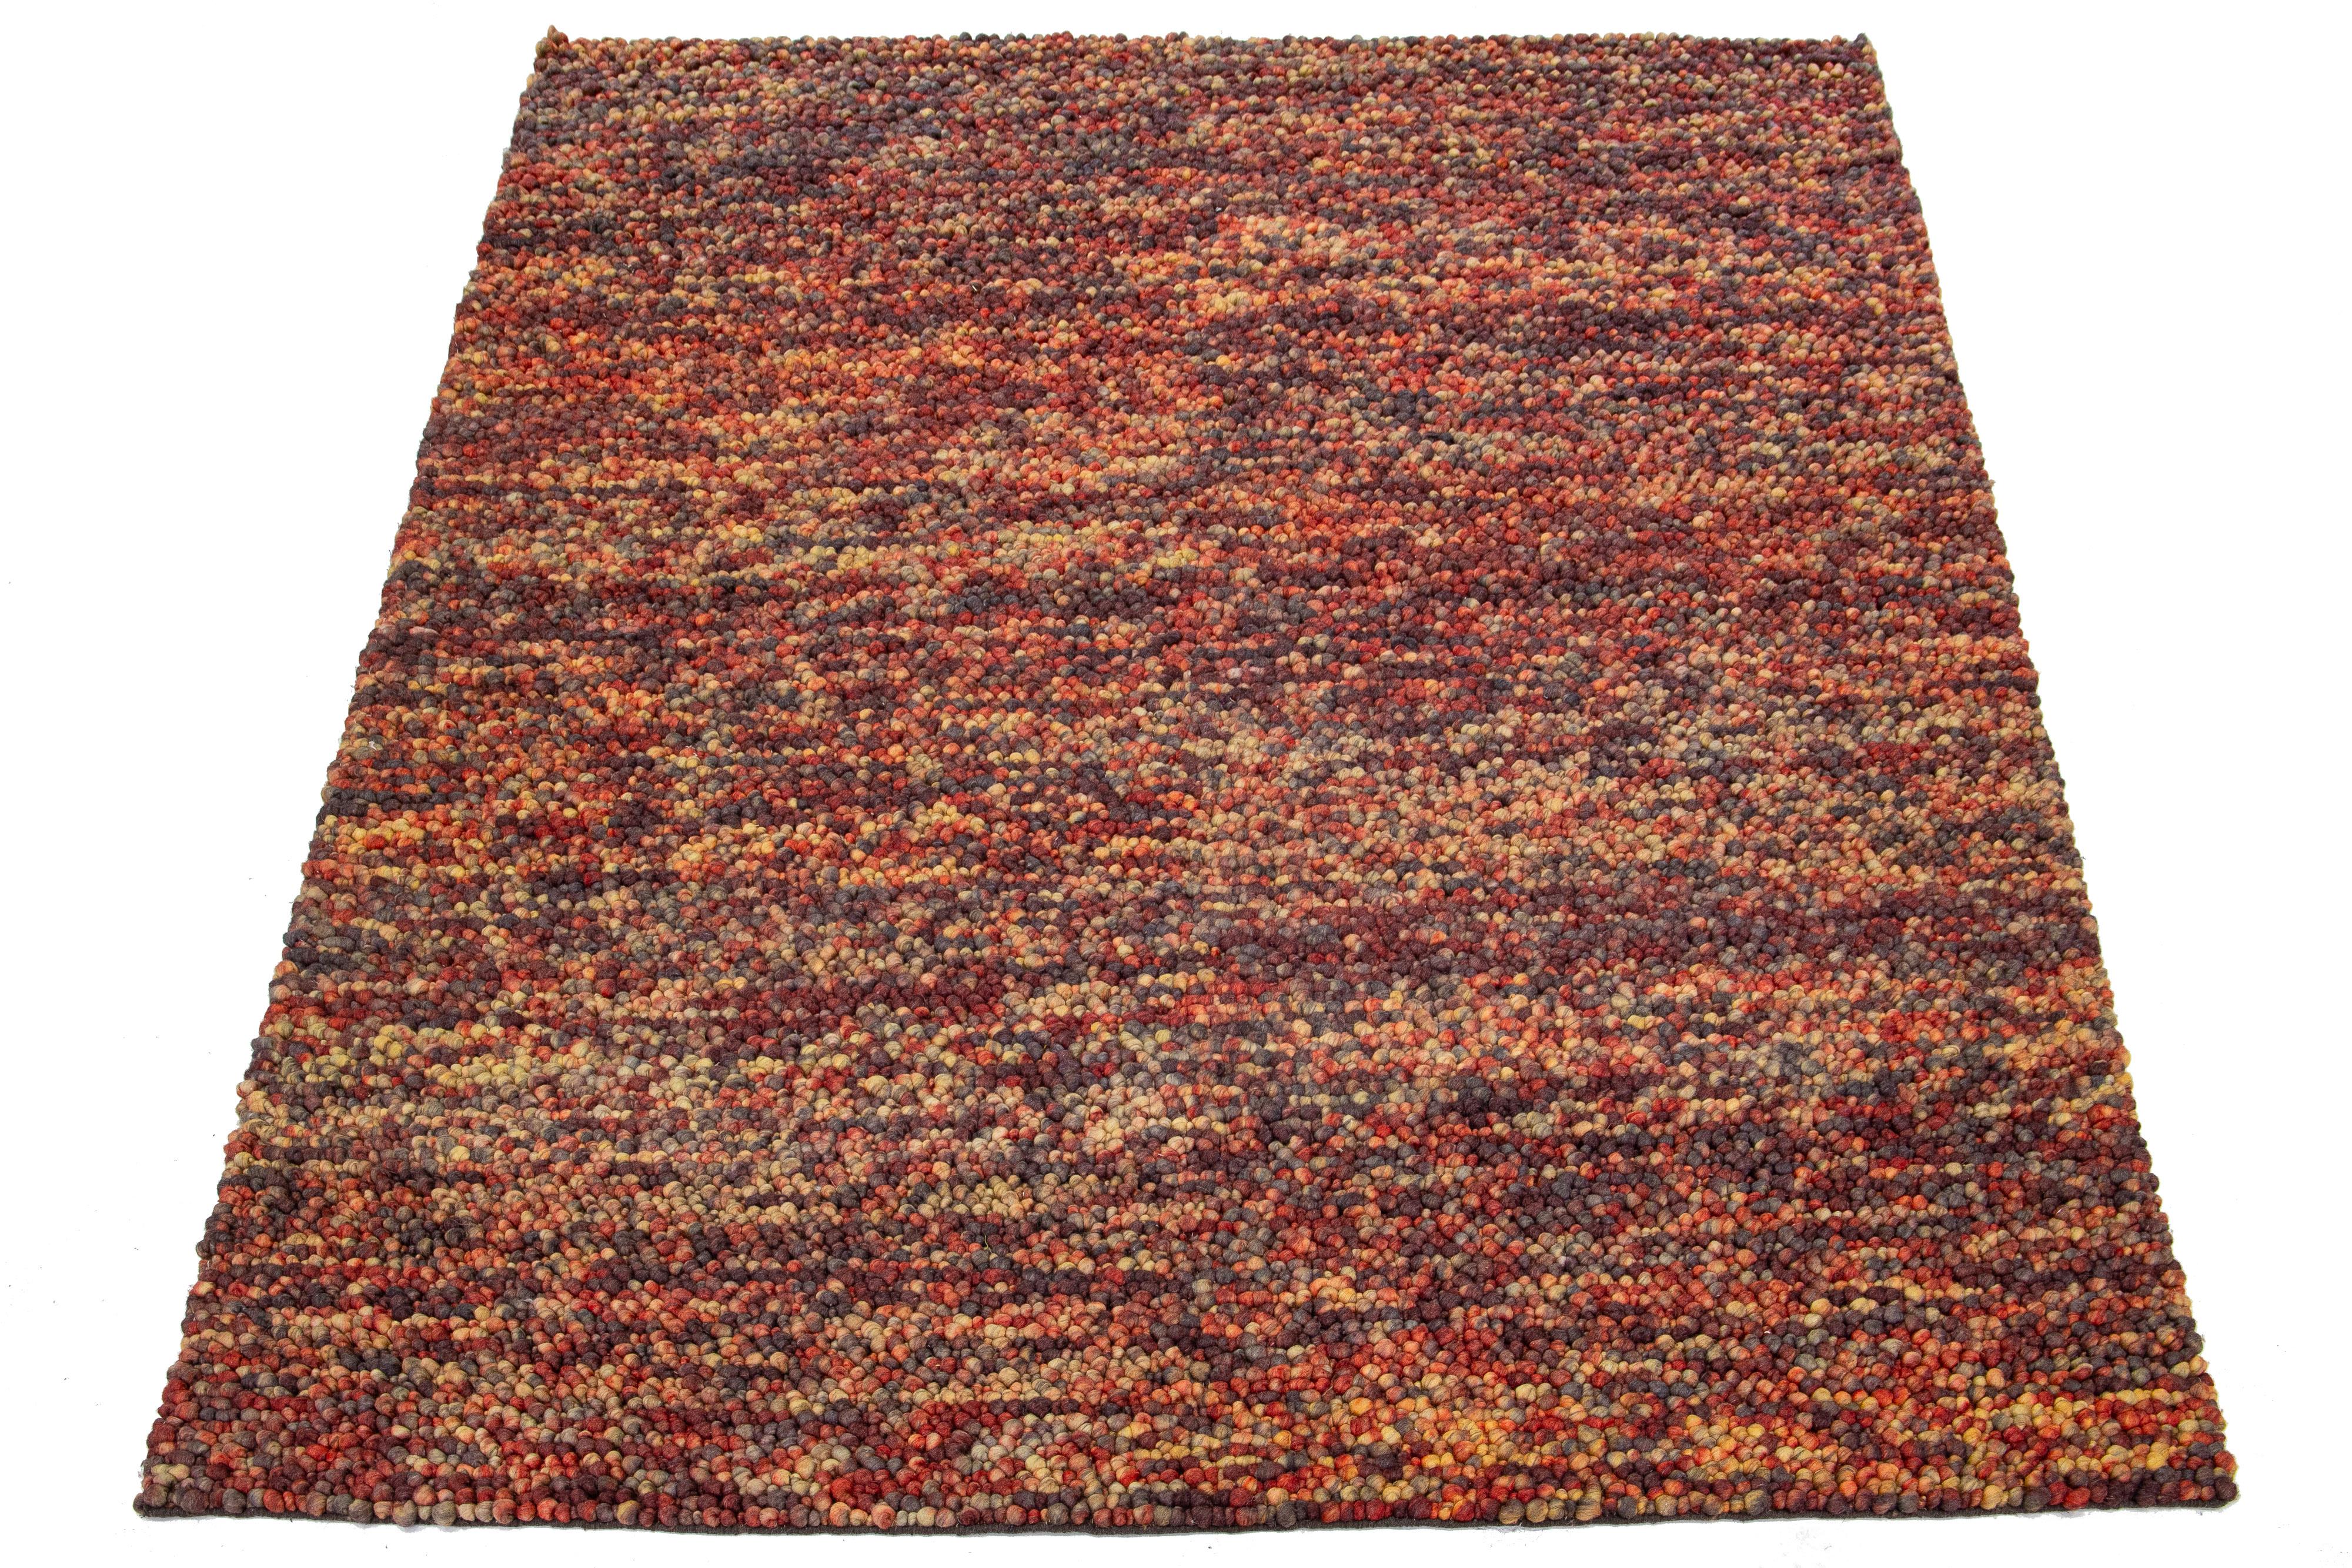 This beautiful, modern texture hand-knotted wool rug part of our Saco collection features a color field of yellow, orange, gray, and red. The rug also boasts a stunning textured abstract design resembling pebbles.

This rug measures 8' x 11'.

Our